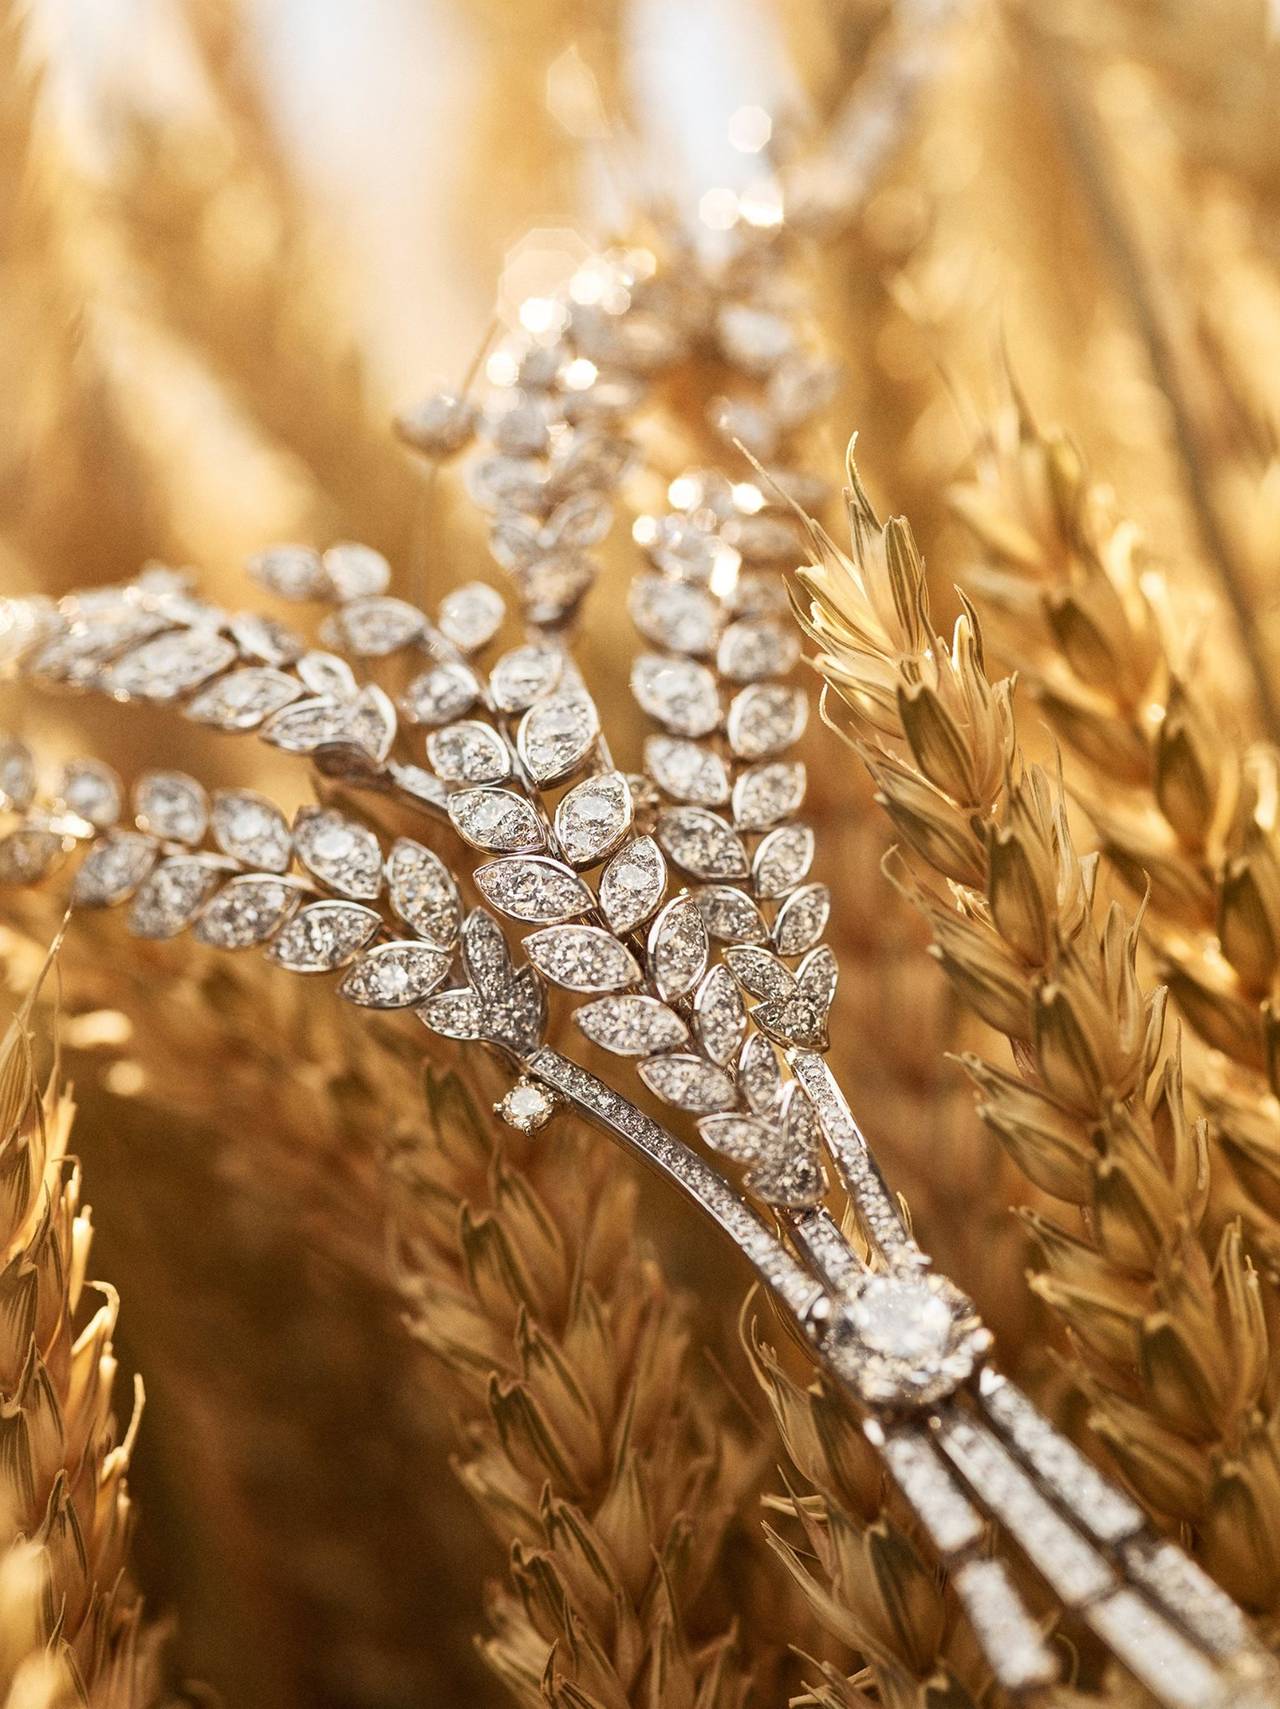 Wheat-Inspired Jewelry: Les Blés de Chanel